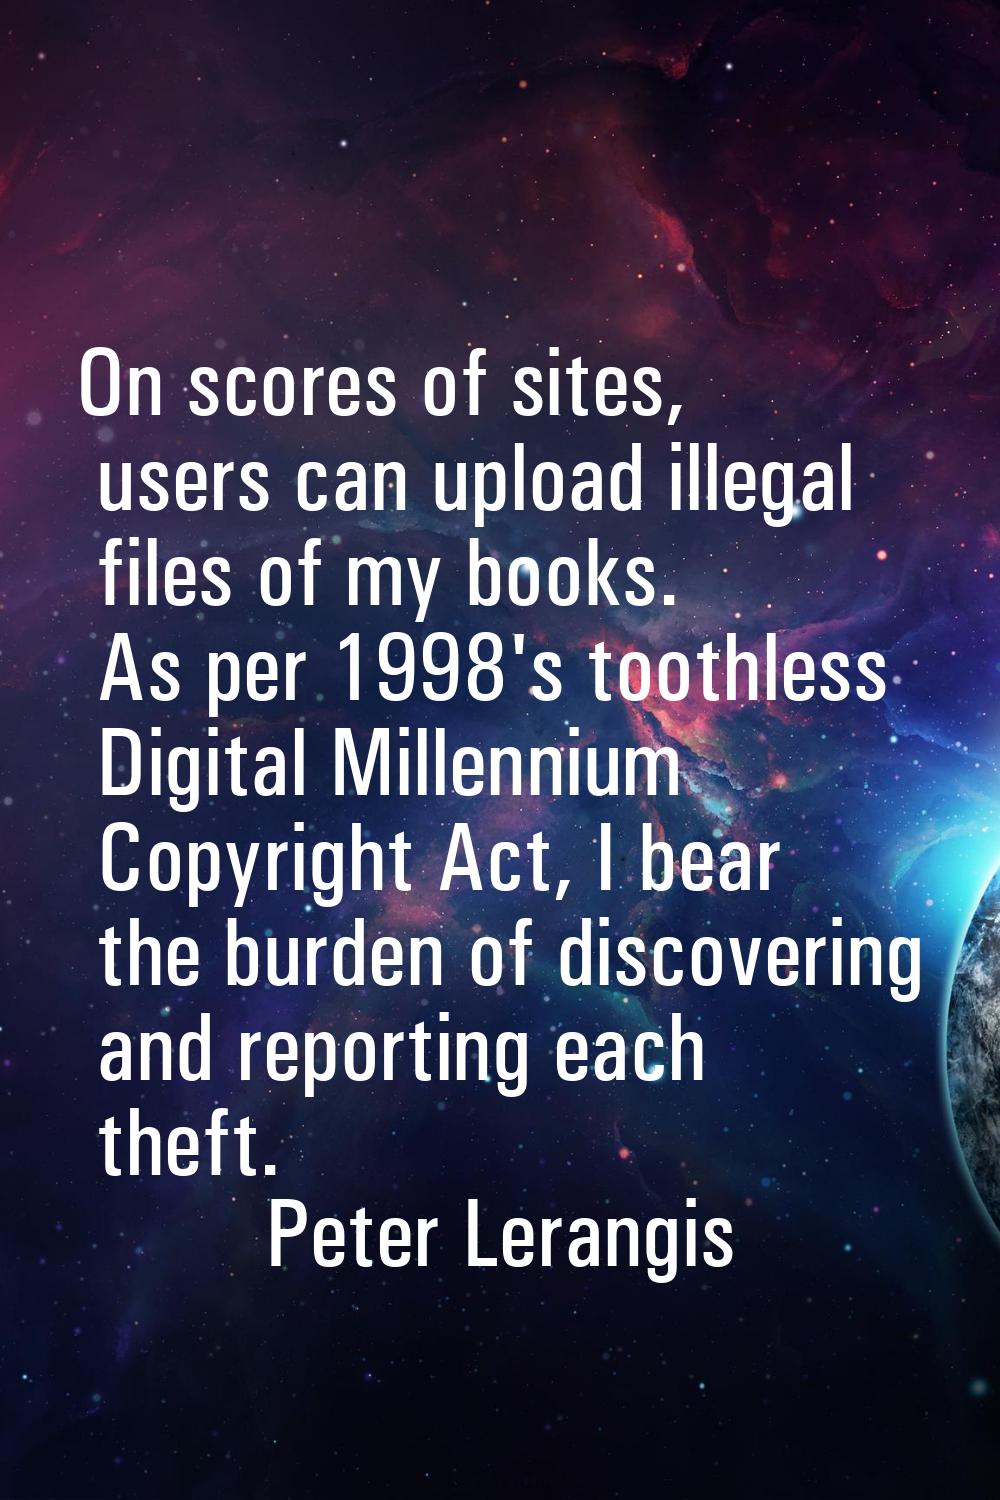 On scores of sites, users can upload illegal files of my books. As per 1998's toothless Digital Mil